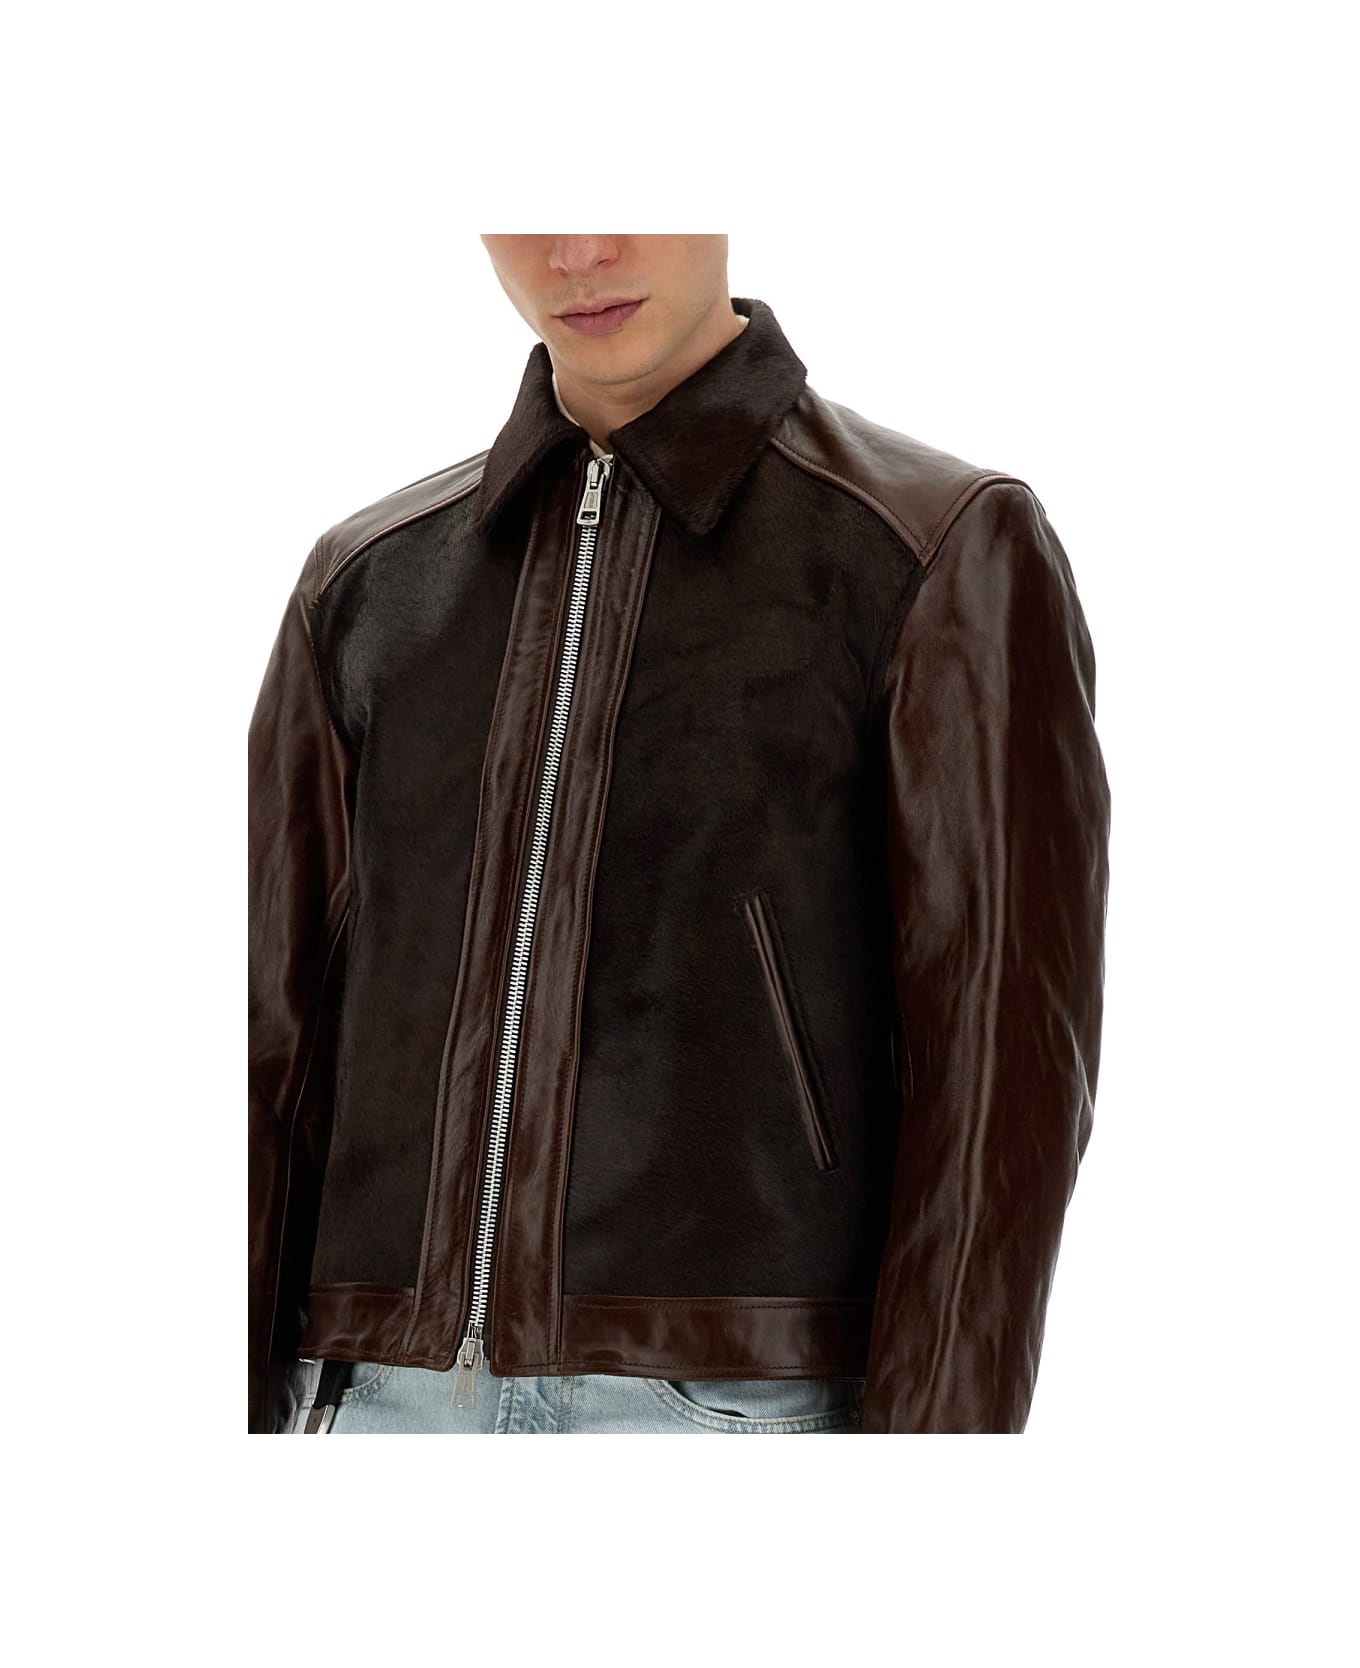 Our Legacy "andalou" Jacket - BROWN